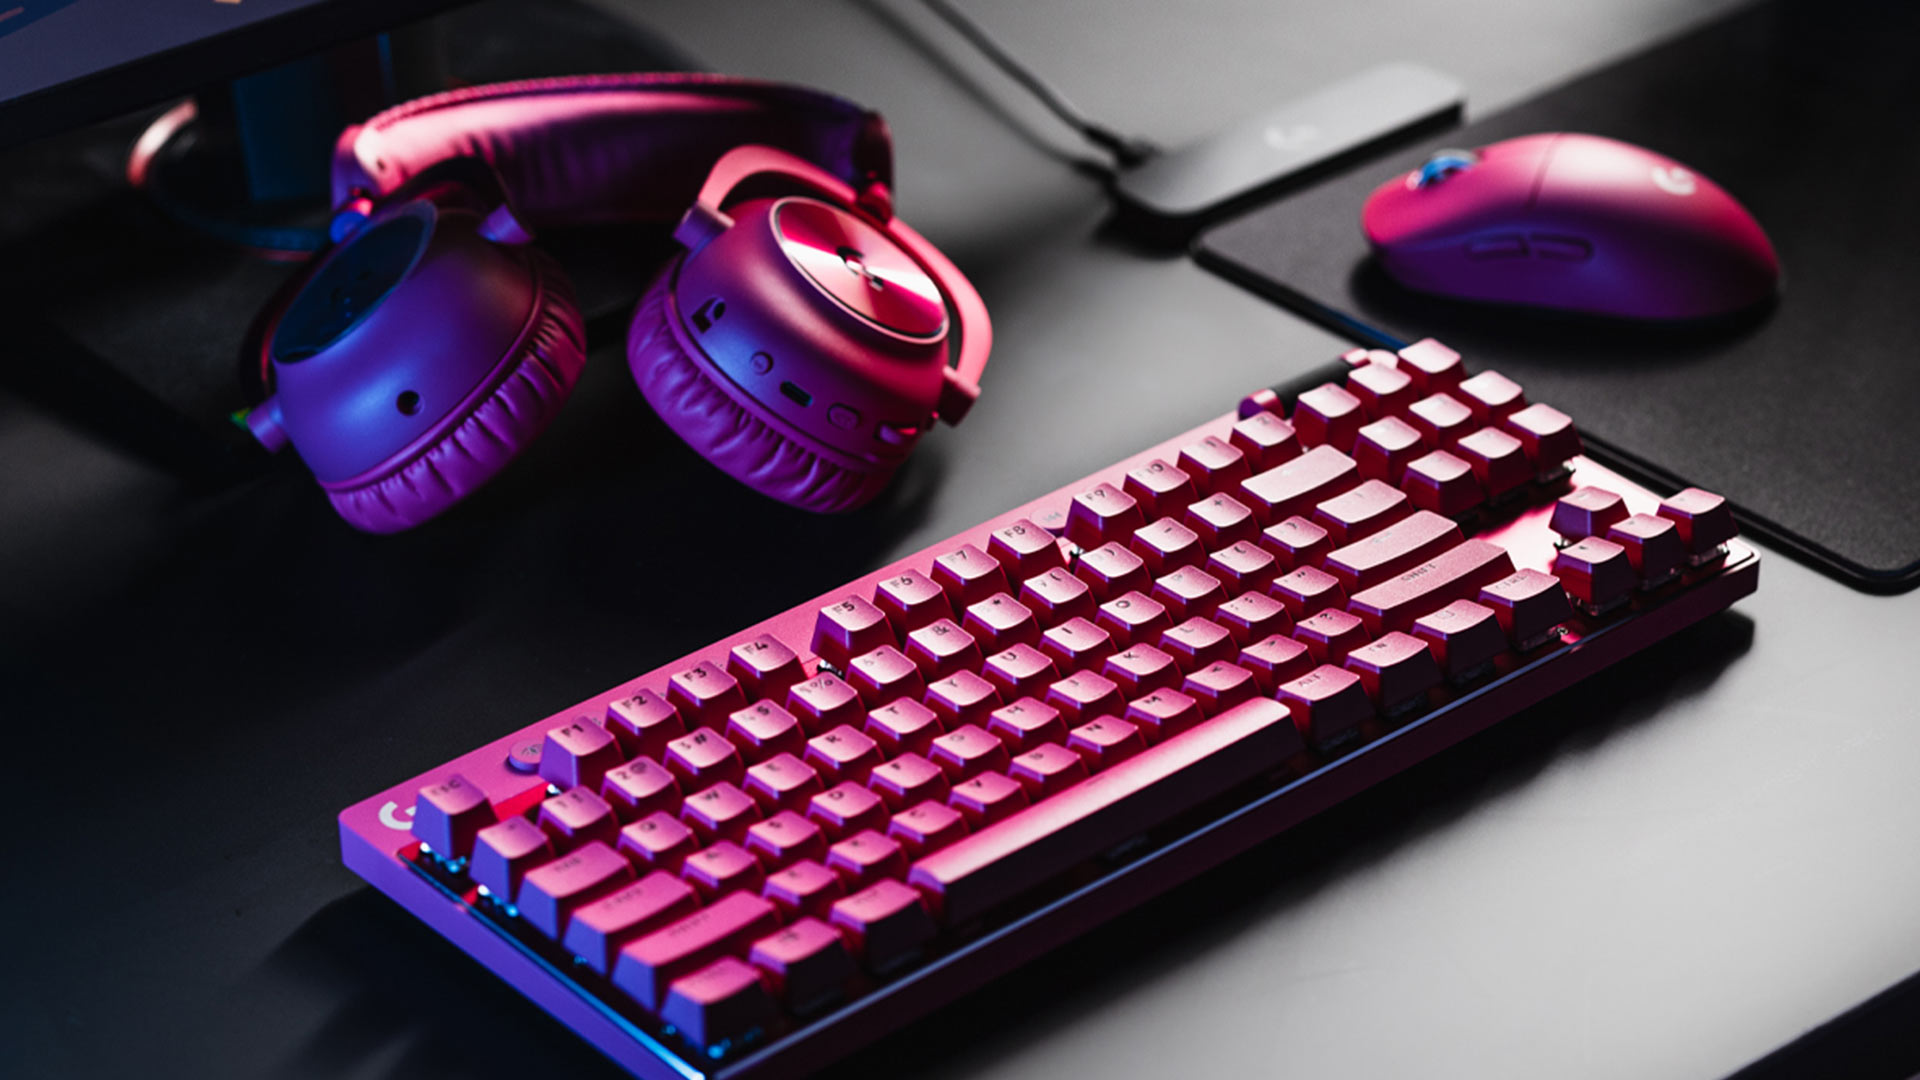 Gamers Rejoice: The Pro X Line Is now Complete